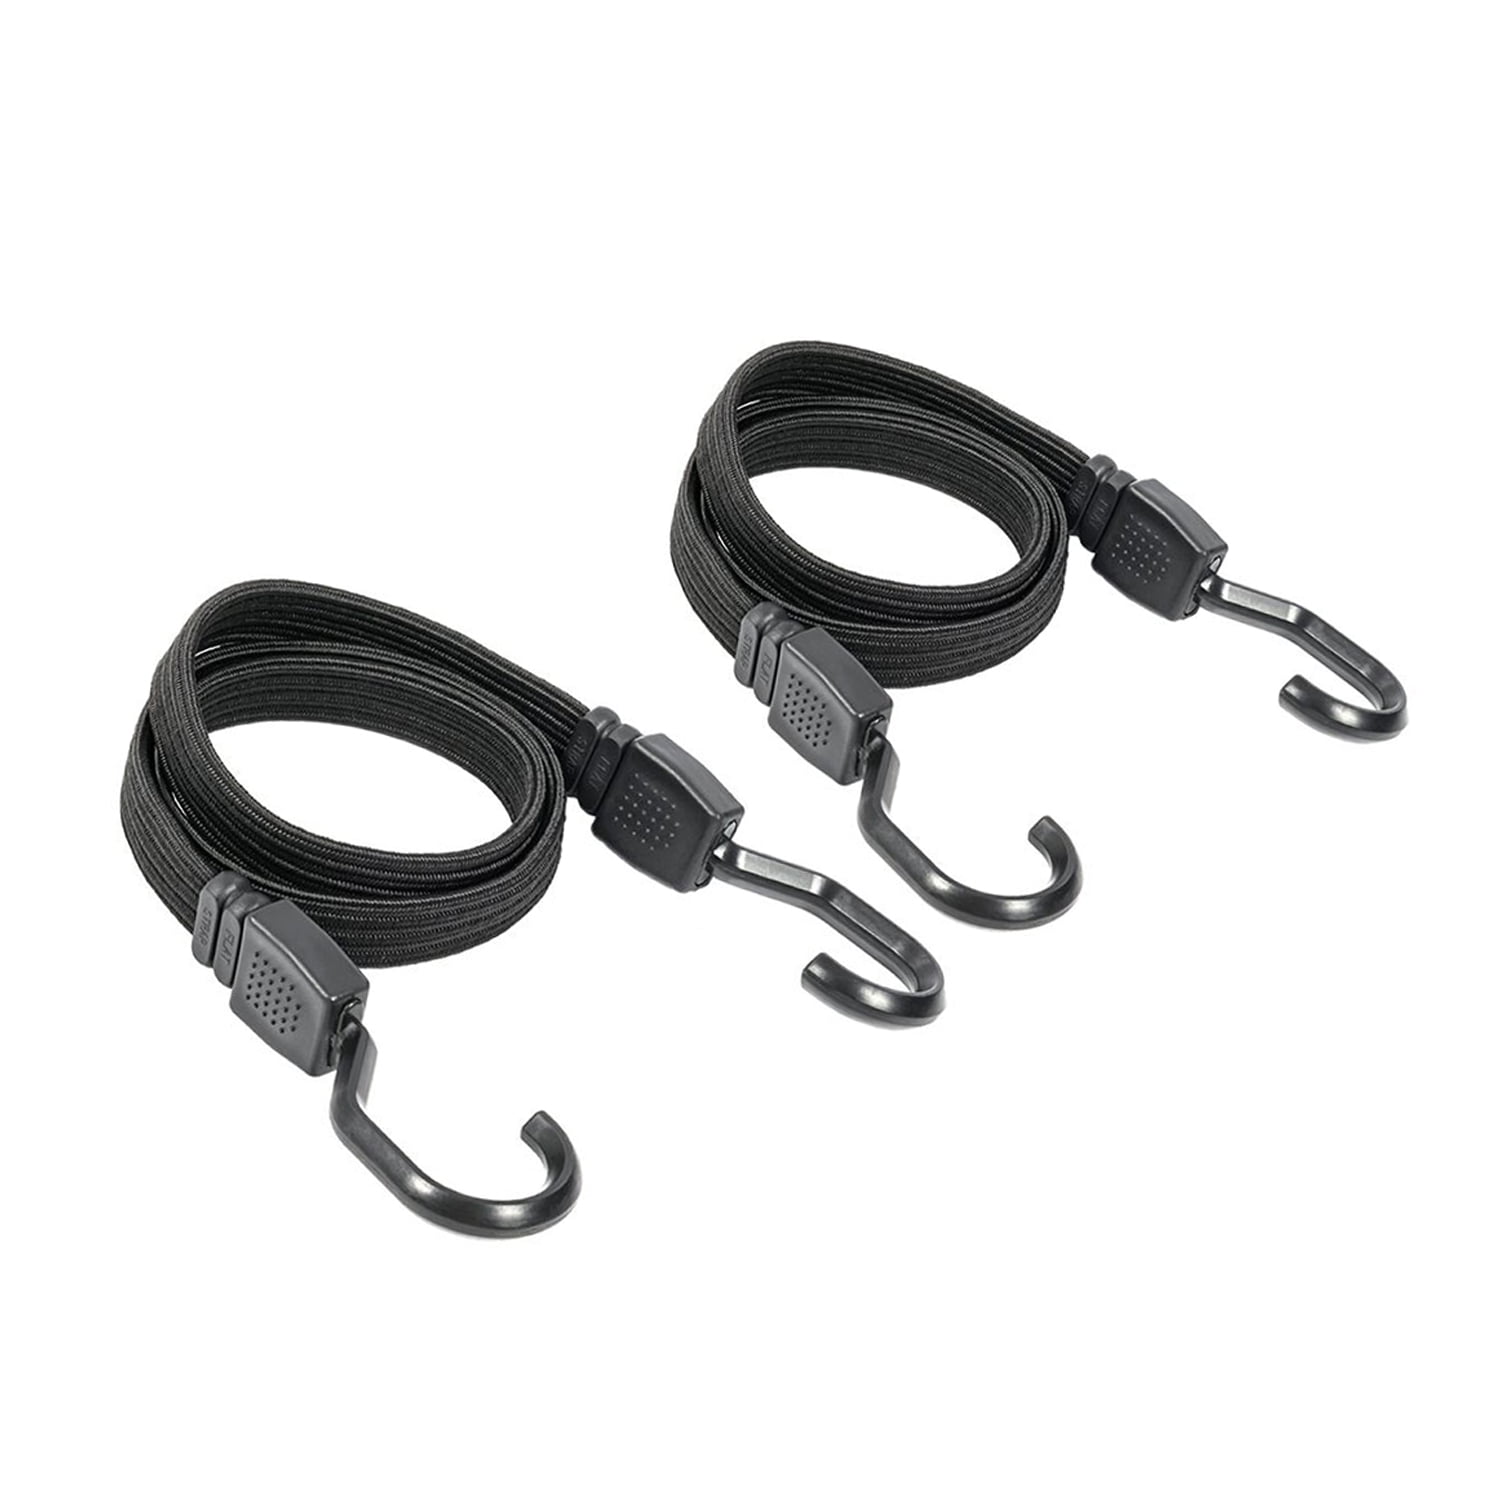 Bungee Cords with Hooks Heavy Duty, Flat Adjustable Bungee Cords with Hooks  37.8 Inch, Rubber Black Bungee Straps with Metal Buckle Hooks for Outdoor,  Camping, Tarps, Bike Rack, Tent, Truck, 2 Pack 